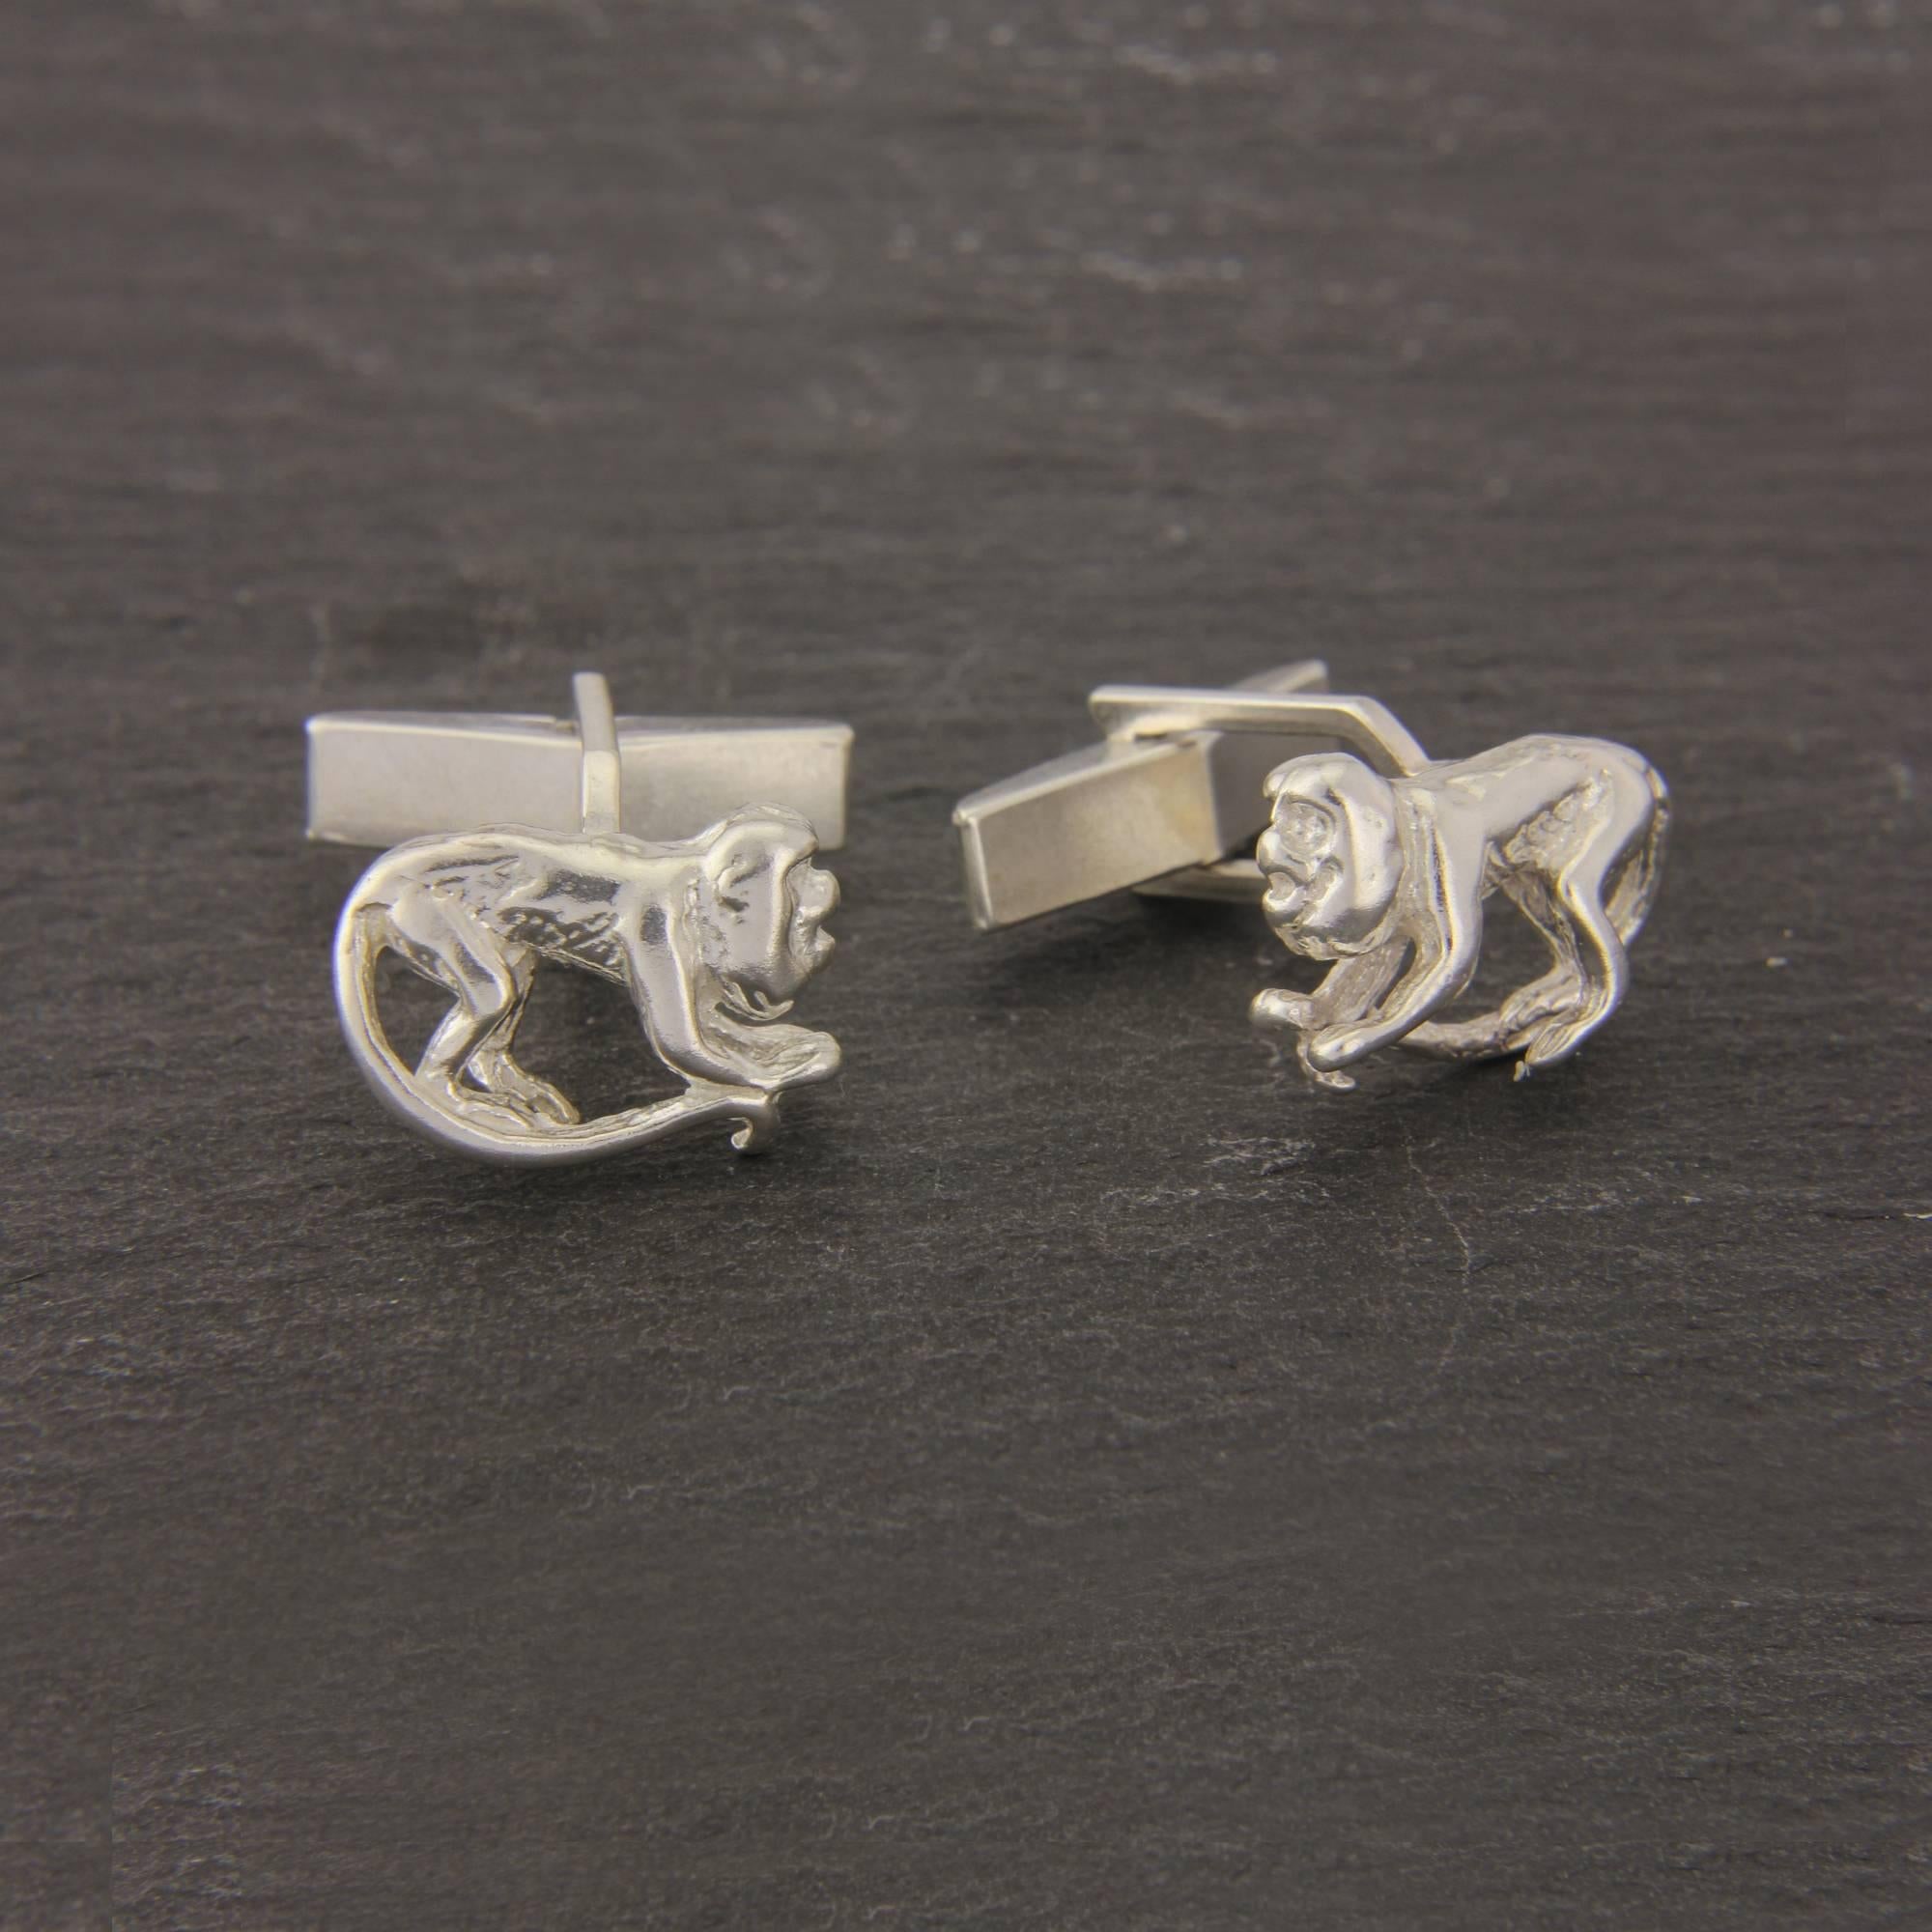 These are striking Monkey cufflinks, handmade in England, in solid Sterling Silver.
This unusual pair of cufflinks captures the essence of the lovable monkey beautifully by using a three dimensional carving .
Solid Sterling Silver high grade swivels